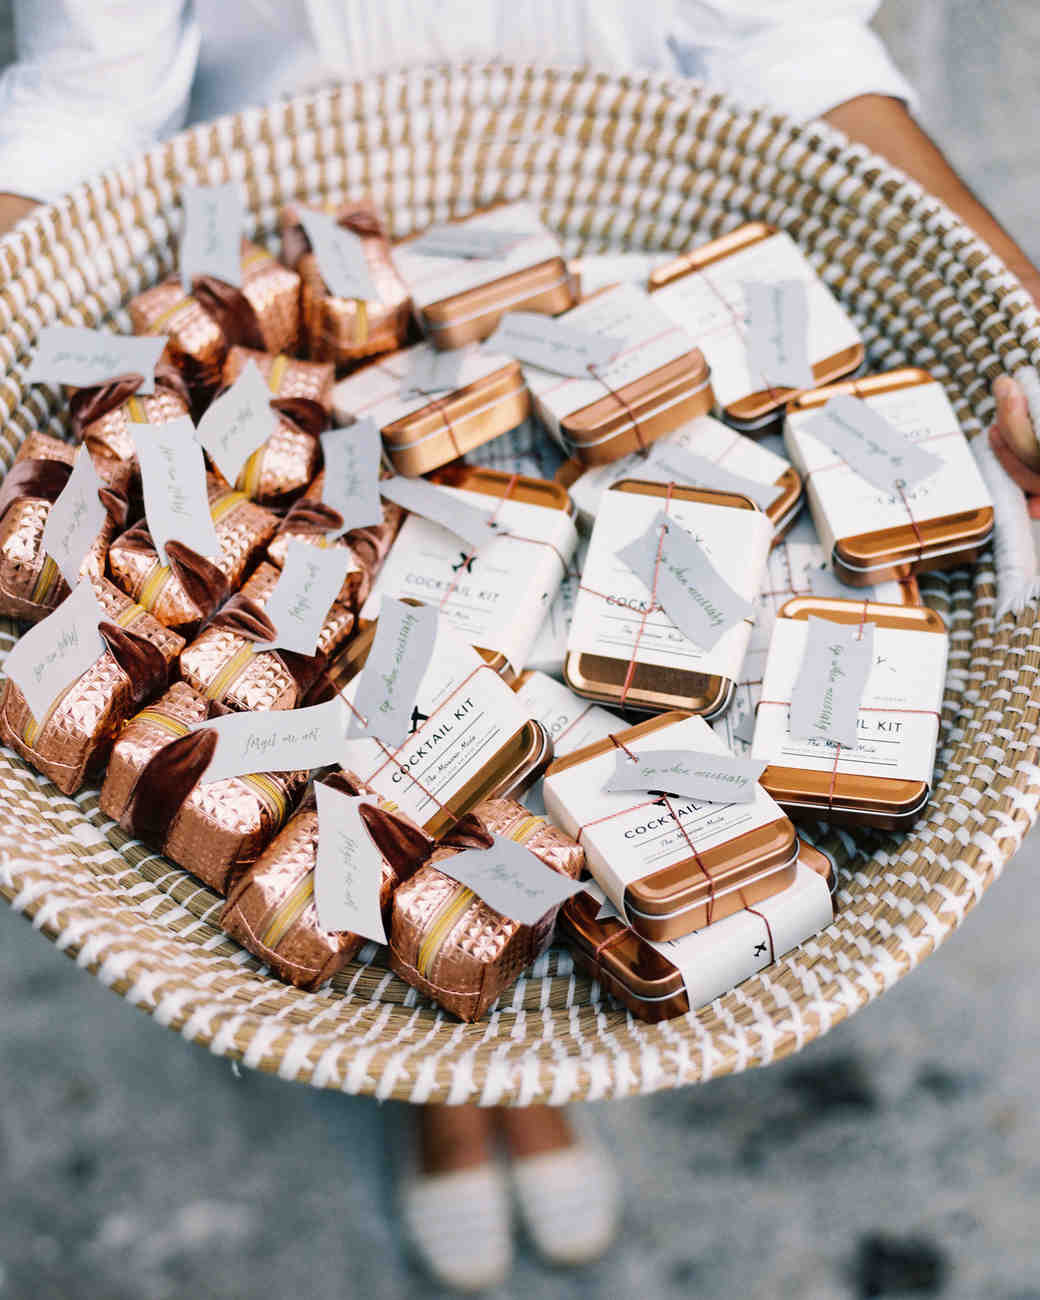 Wedding Favors For Guests
 50 Creative Wedding Favors That Will Delight Your Guests